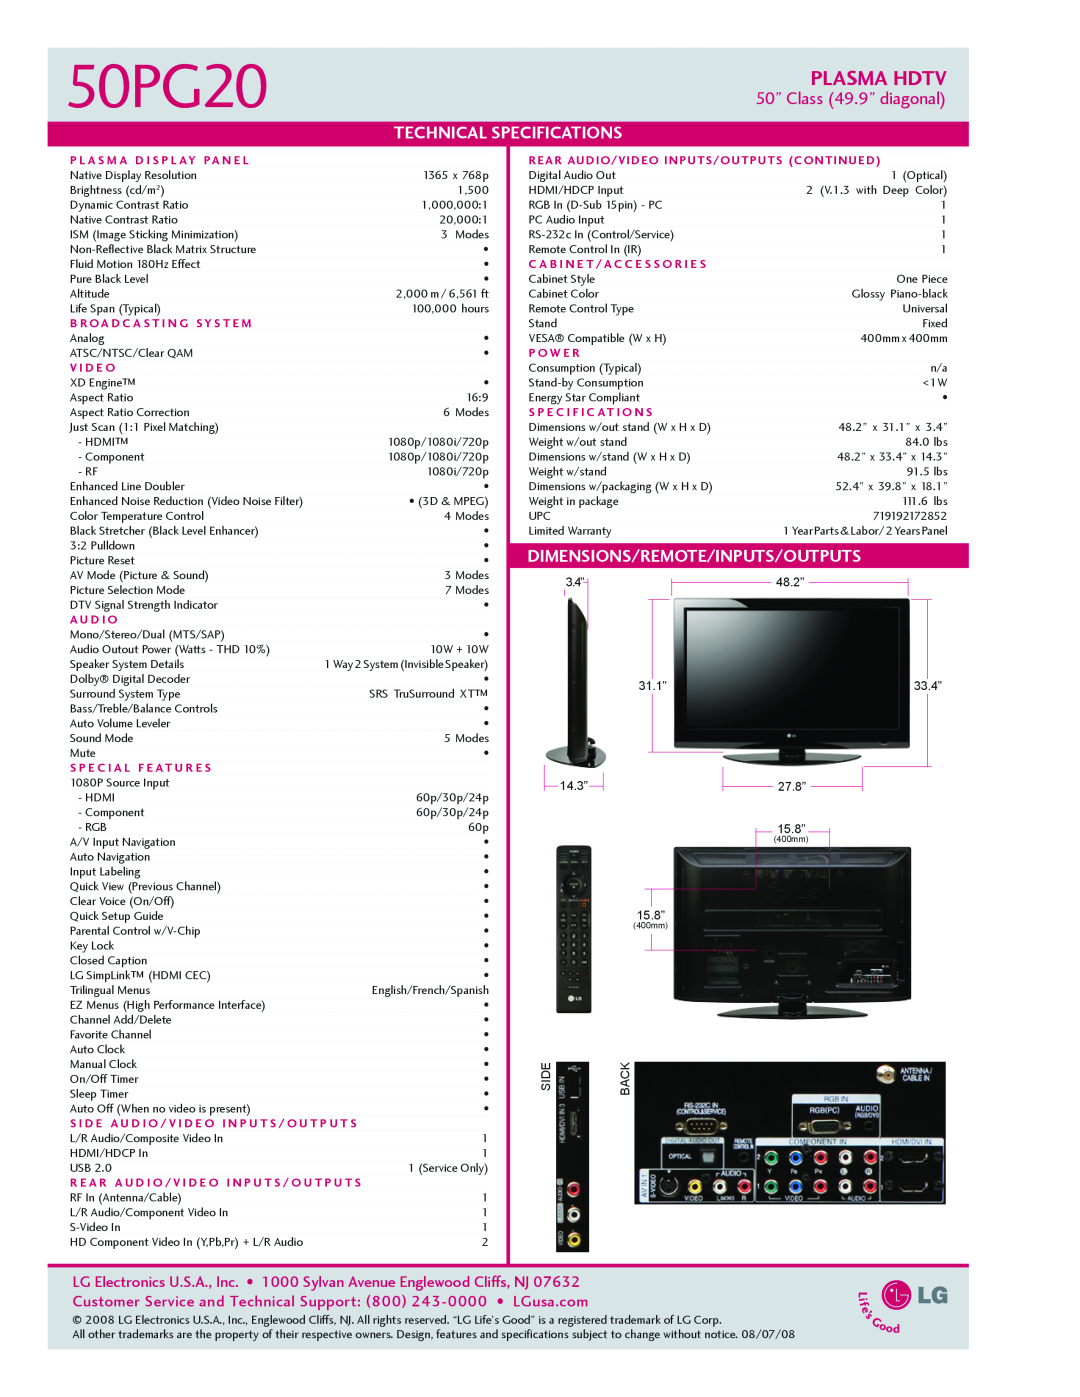 LG Electronics 50PG20 Plasma Hdtv, 50” Class 49.9” diagonal, Technical, Specifications, Dimensions/Remote/Inputs/Outputs 